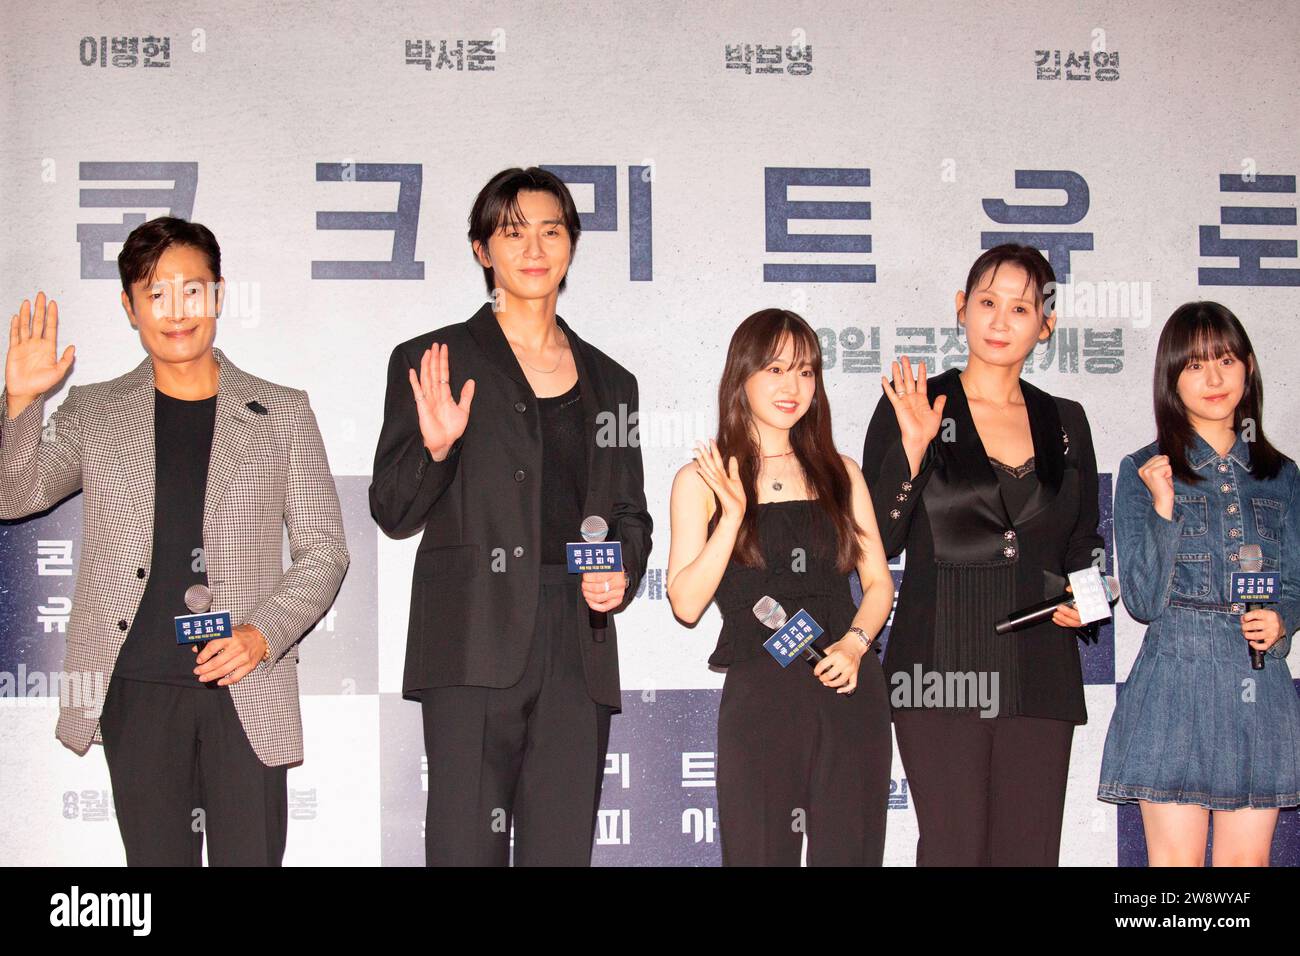 Lee Byung-Hun, Park Seo-Jun, Park Bo-Young, Kim Sun-Young and Park Ji-Hu, Aug 8, 2023 : Cast members (L-R) Lee Byung-Hun, Park Seo-Jun, Park Bo-Young, Kim Sun-Young and Park Ji-Hu pose at a photo call before the VIP preview of South Korean movie 'Concrete Utopia' at a theatre in Seoul, South Korea. The disaster thriller 'Concrete Utopia' revolves around the residents of the only apartment building that survived a catastrophic earthquake in Seoul. Credit: Lee Jae-Won/AFLO/Alamy Live News Stock Photo